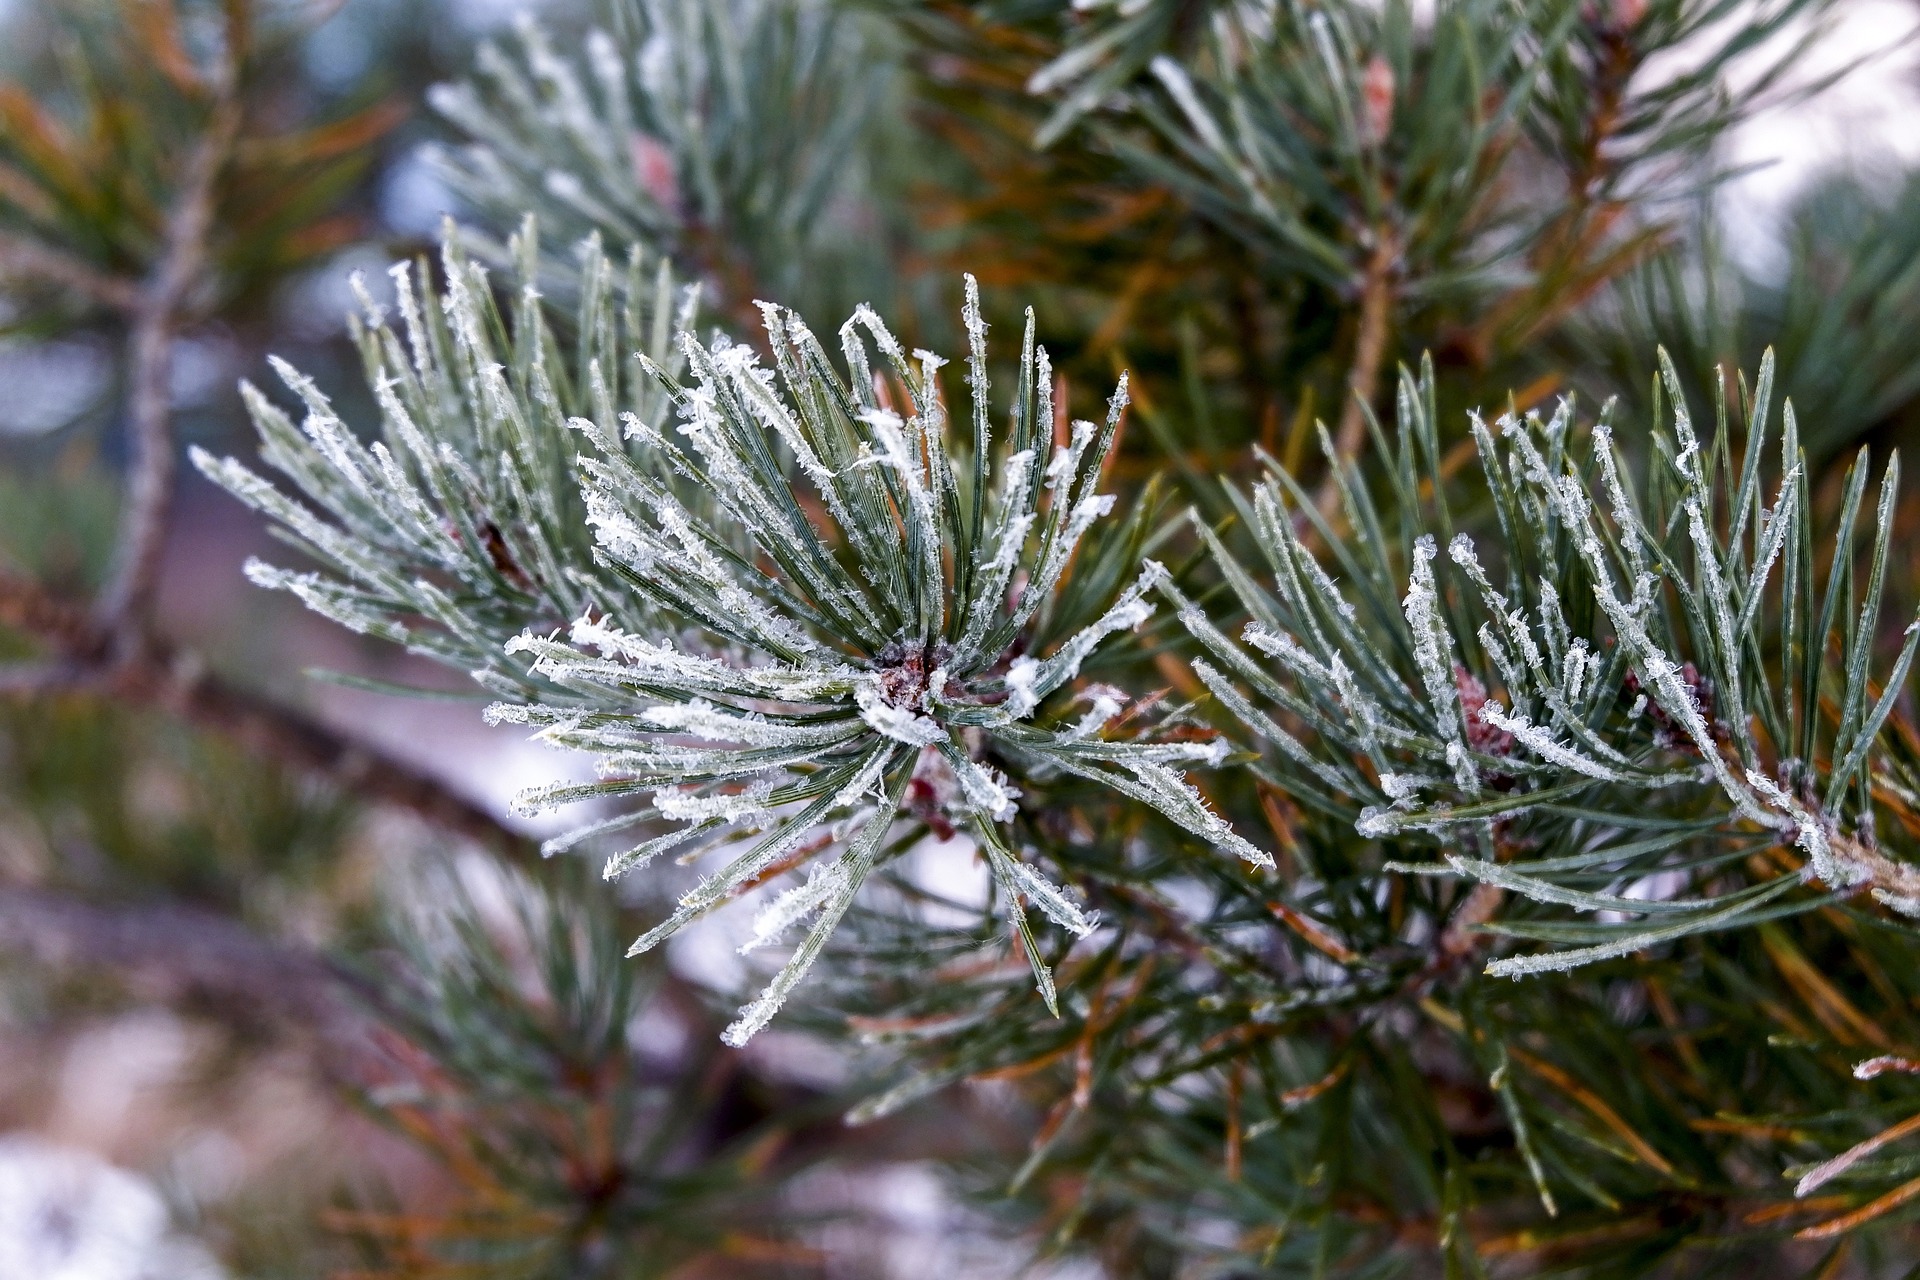 A branch of a pine tree with snow on it